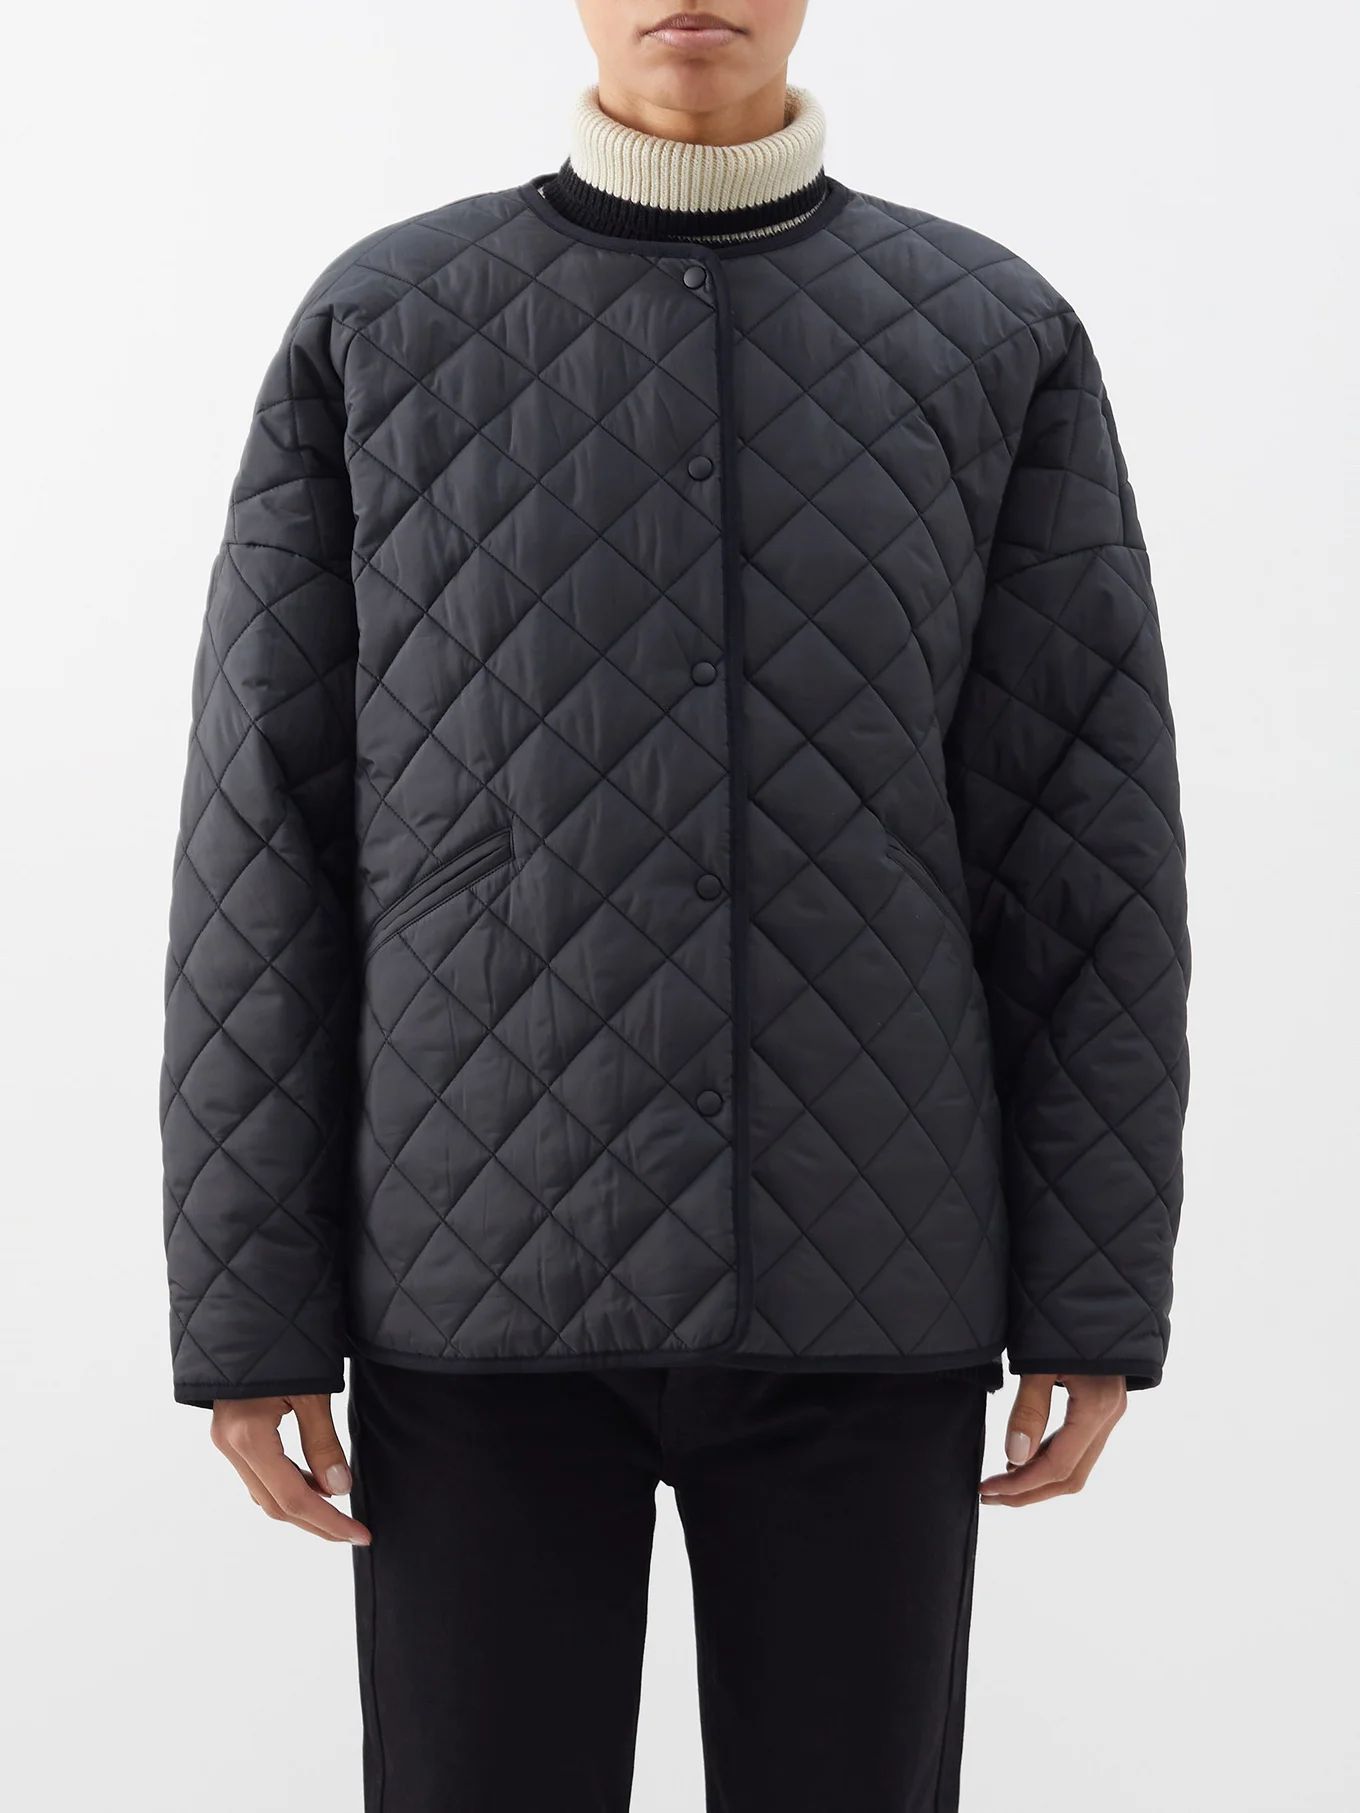 Dublin diamond-quilted soft-shell jacket | Toteme | Matches (US)